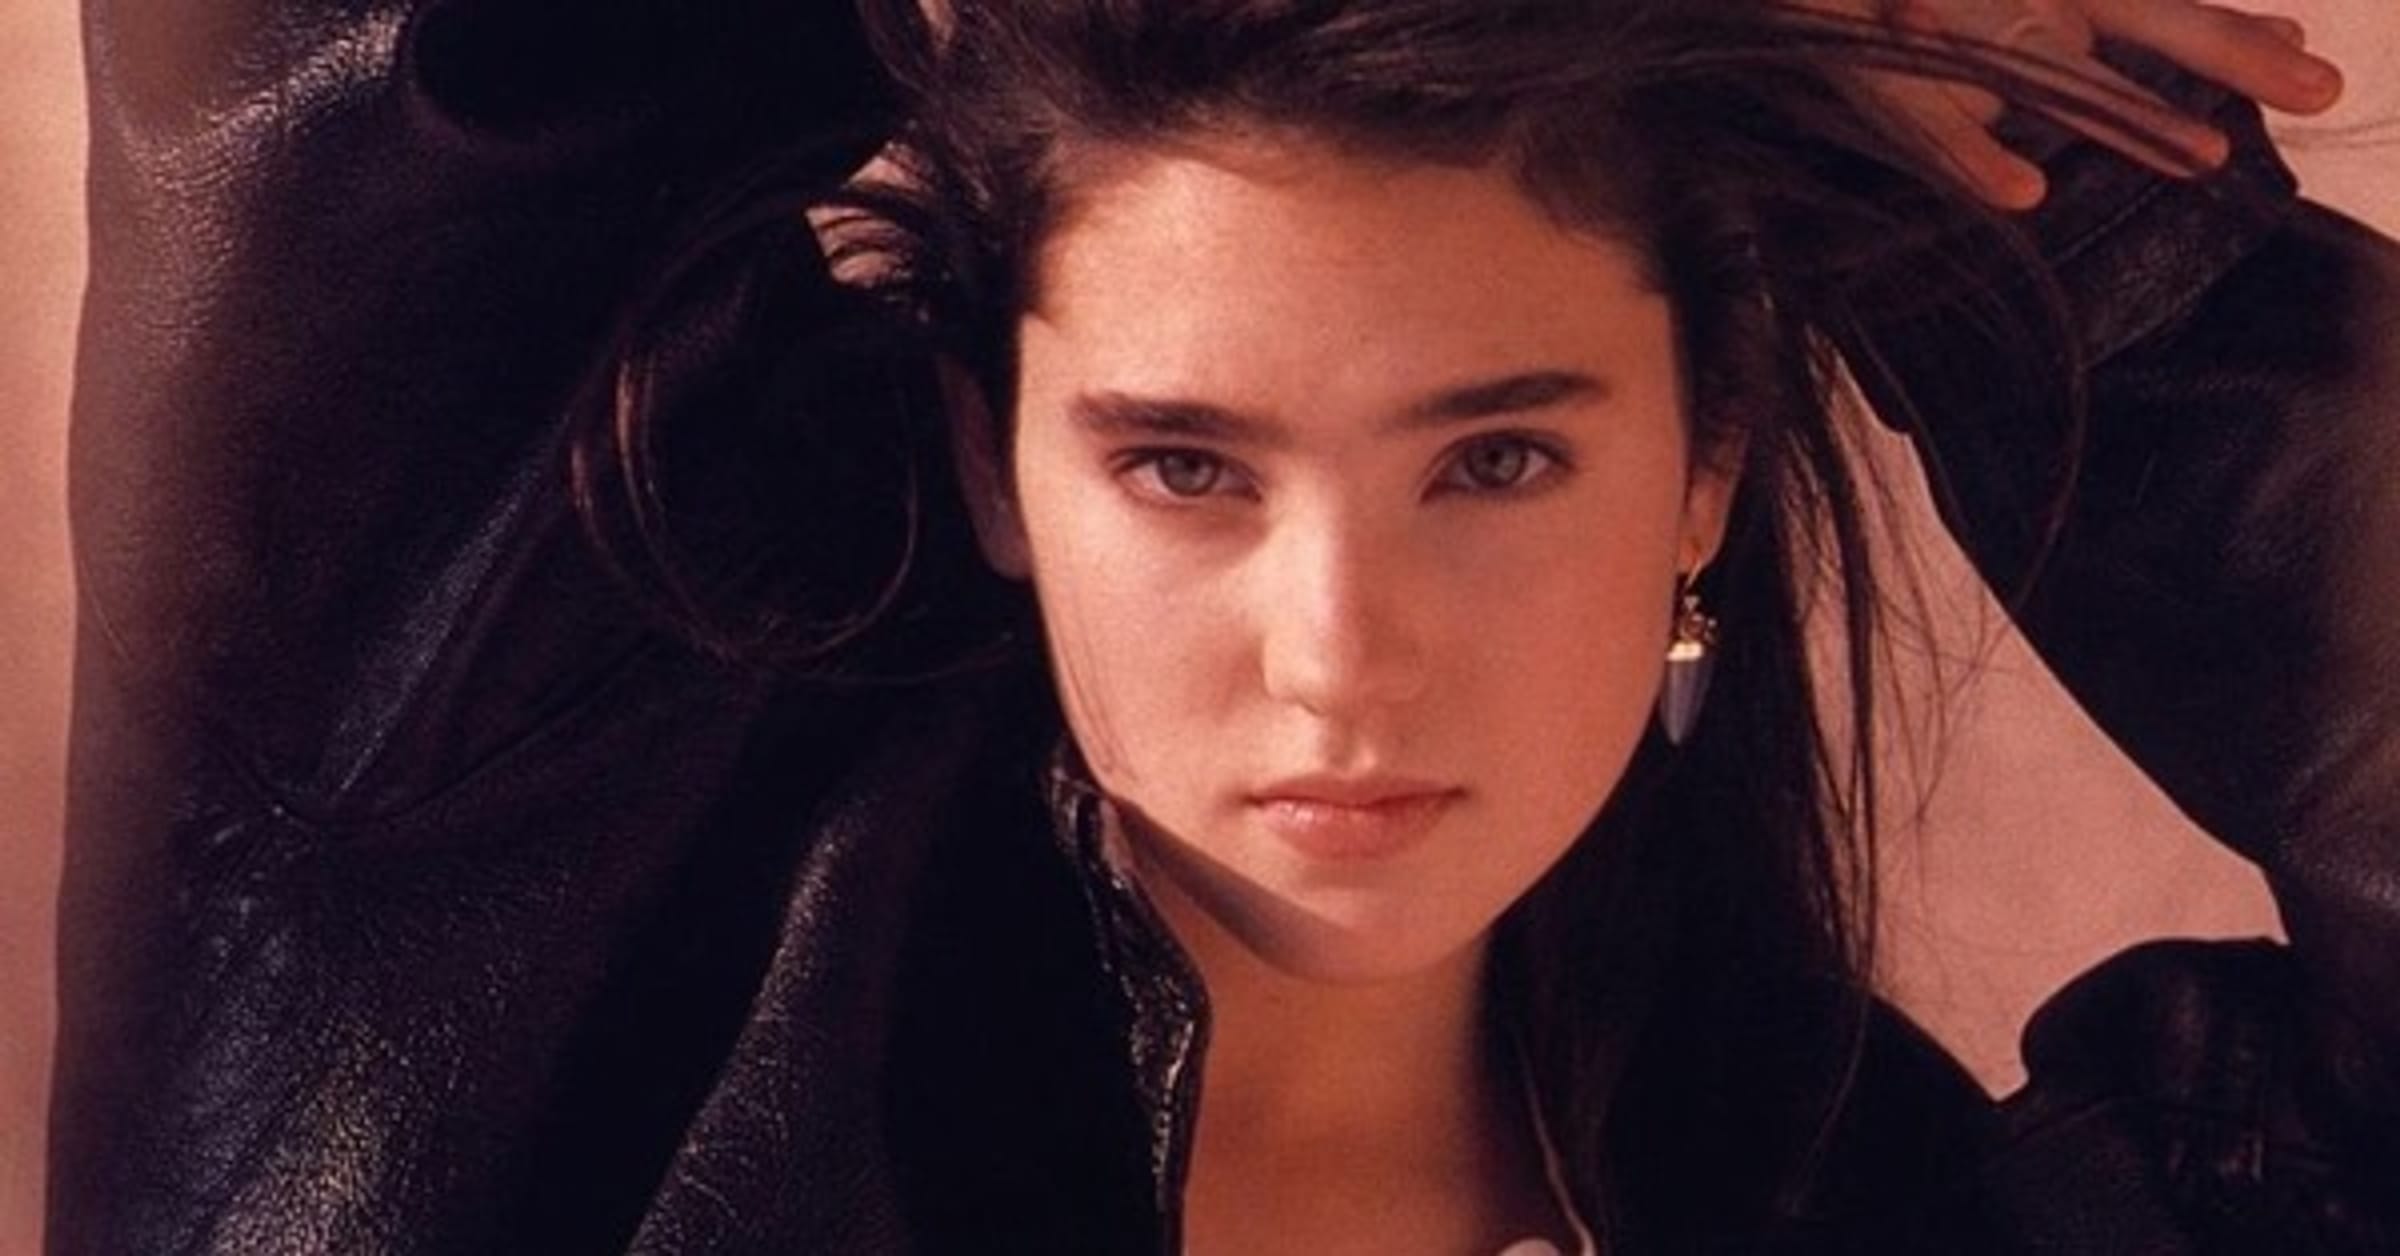 Jennifer Connelly was very young when she starred in iconic